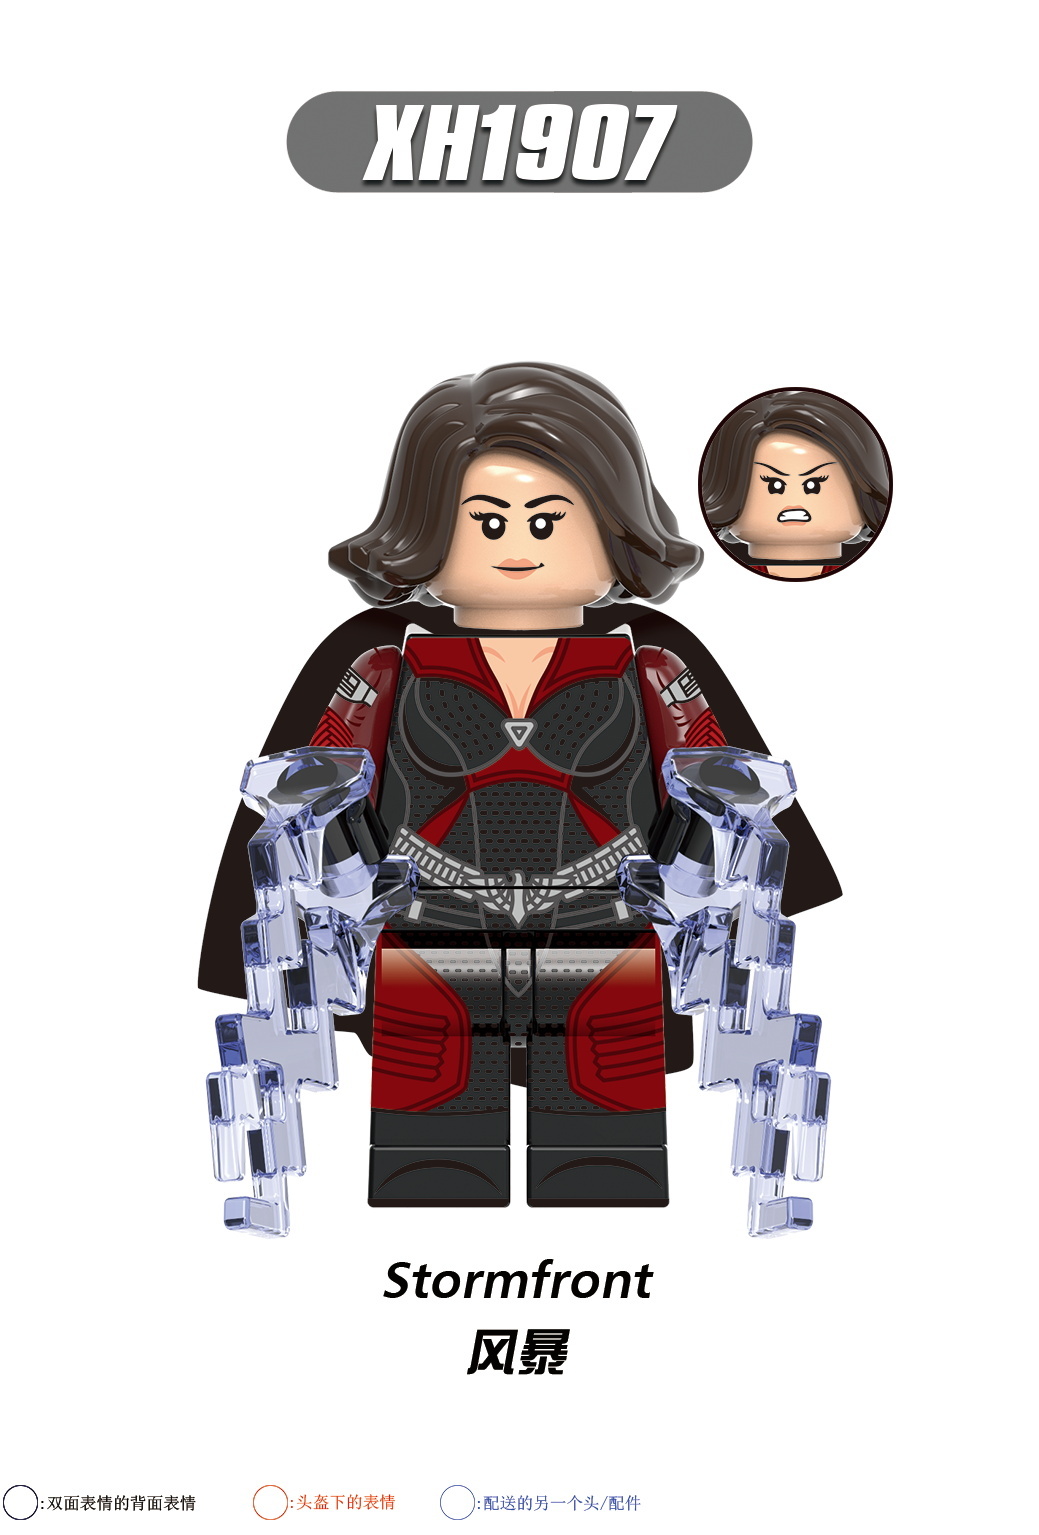 X0337 1903 1904 1905 1906 1907 1908 1909 1910 KF1244 KF1245 KF1246 KF1247 KF1248 Building Blocks The Boys Homelander Starlight Soldier Boy Crimson Countess Stormfront A-Train Queen Maeve The Deep Action Figures Educational Toys For Kids Gifts